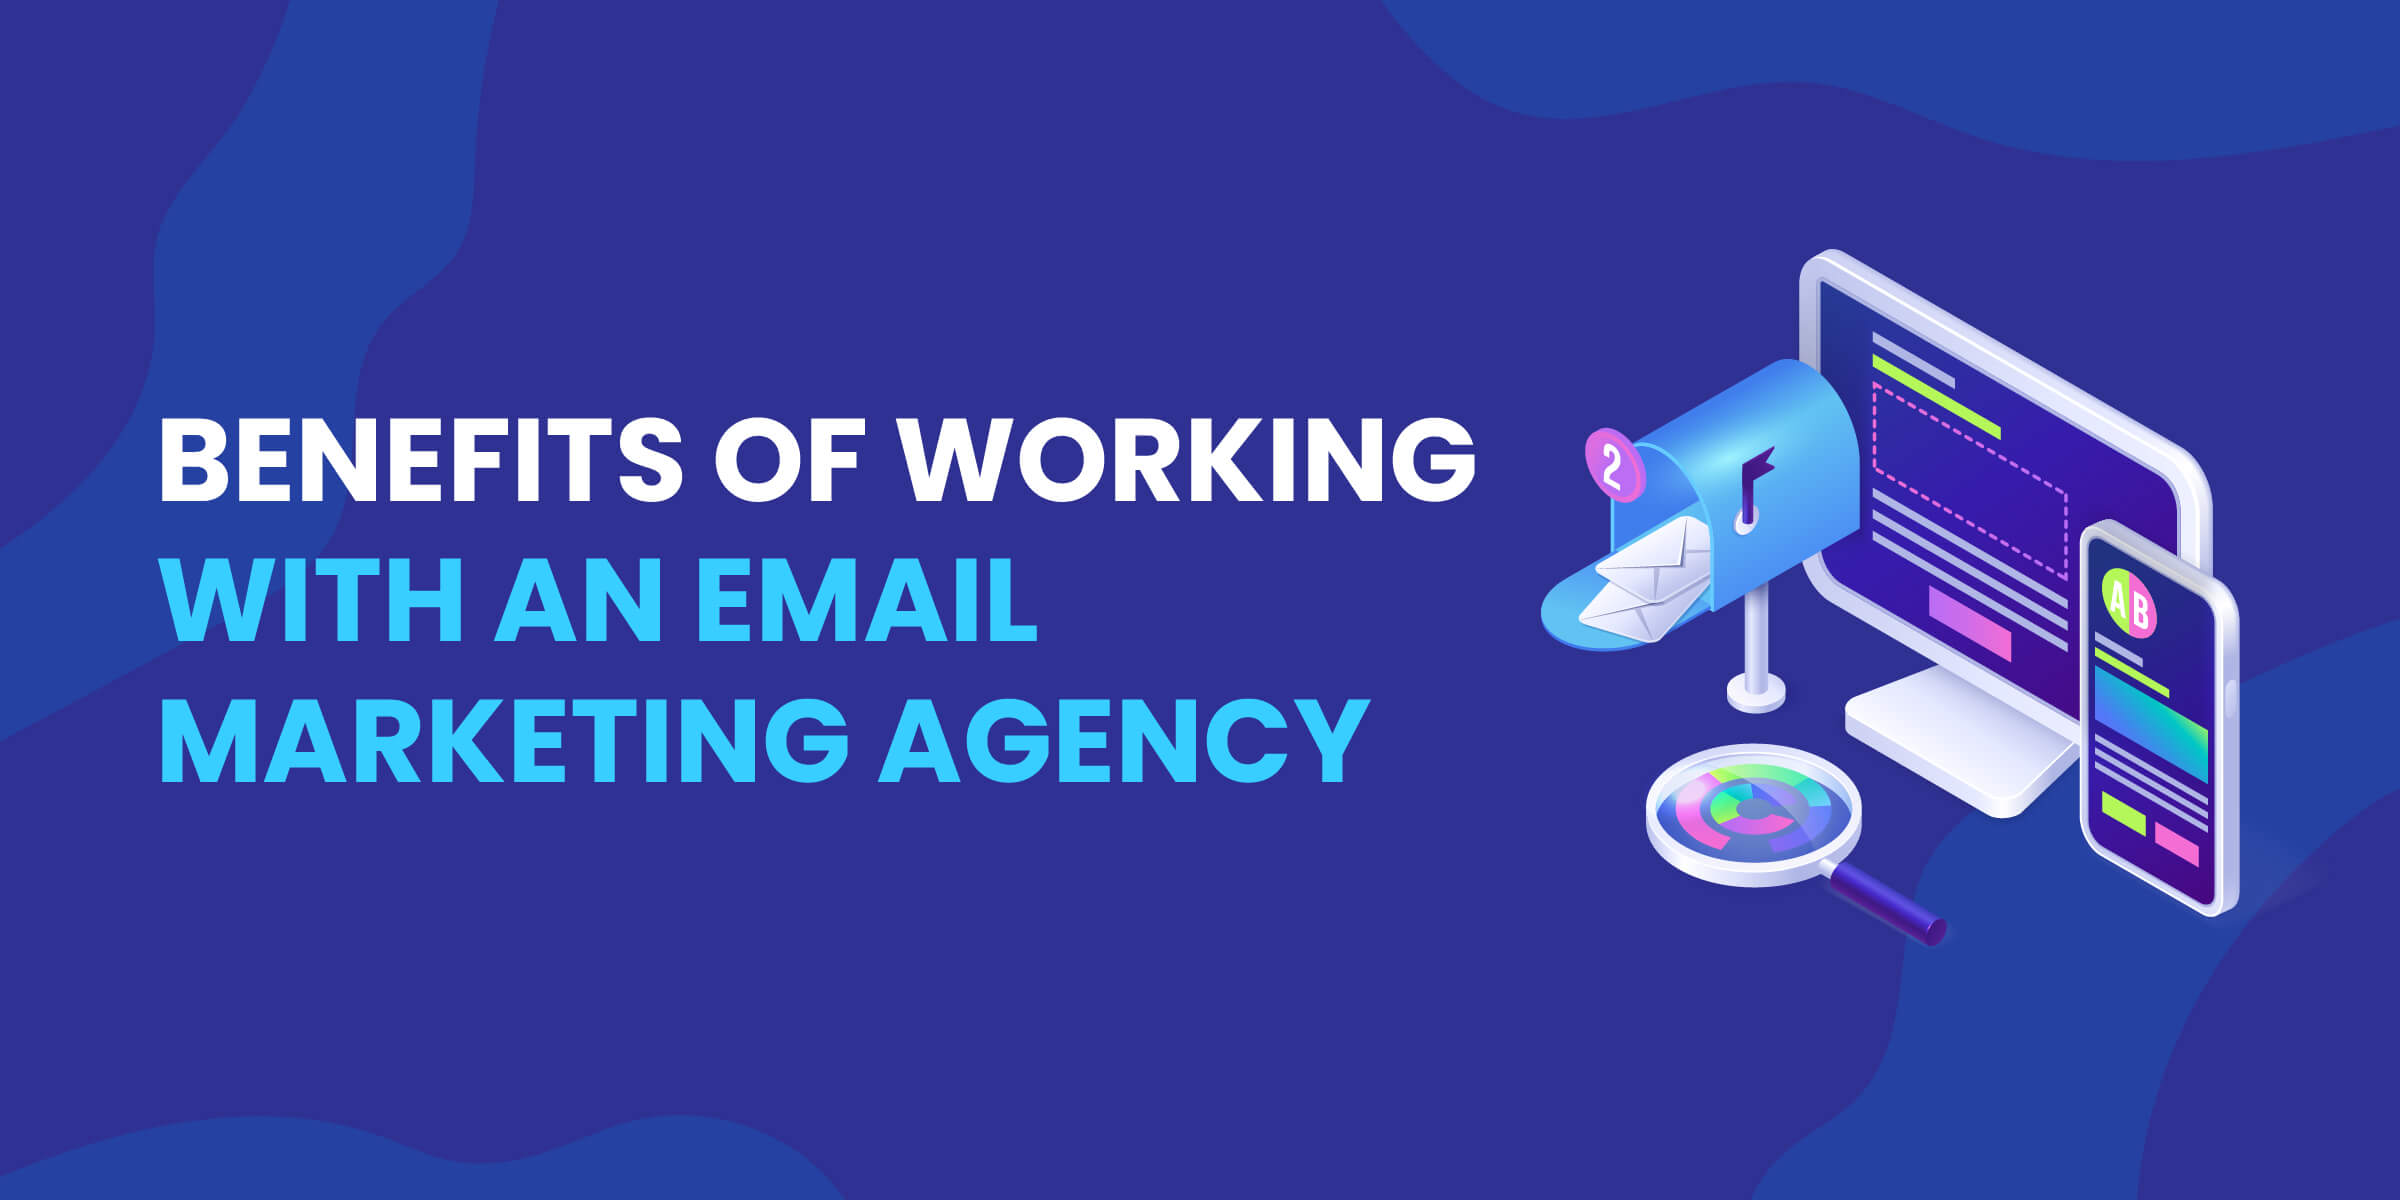 Benefits of Working with Email Marketing Agency